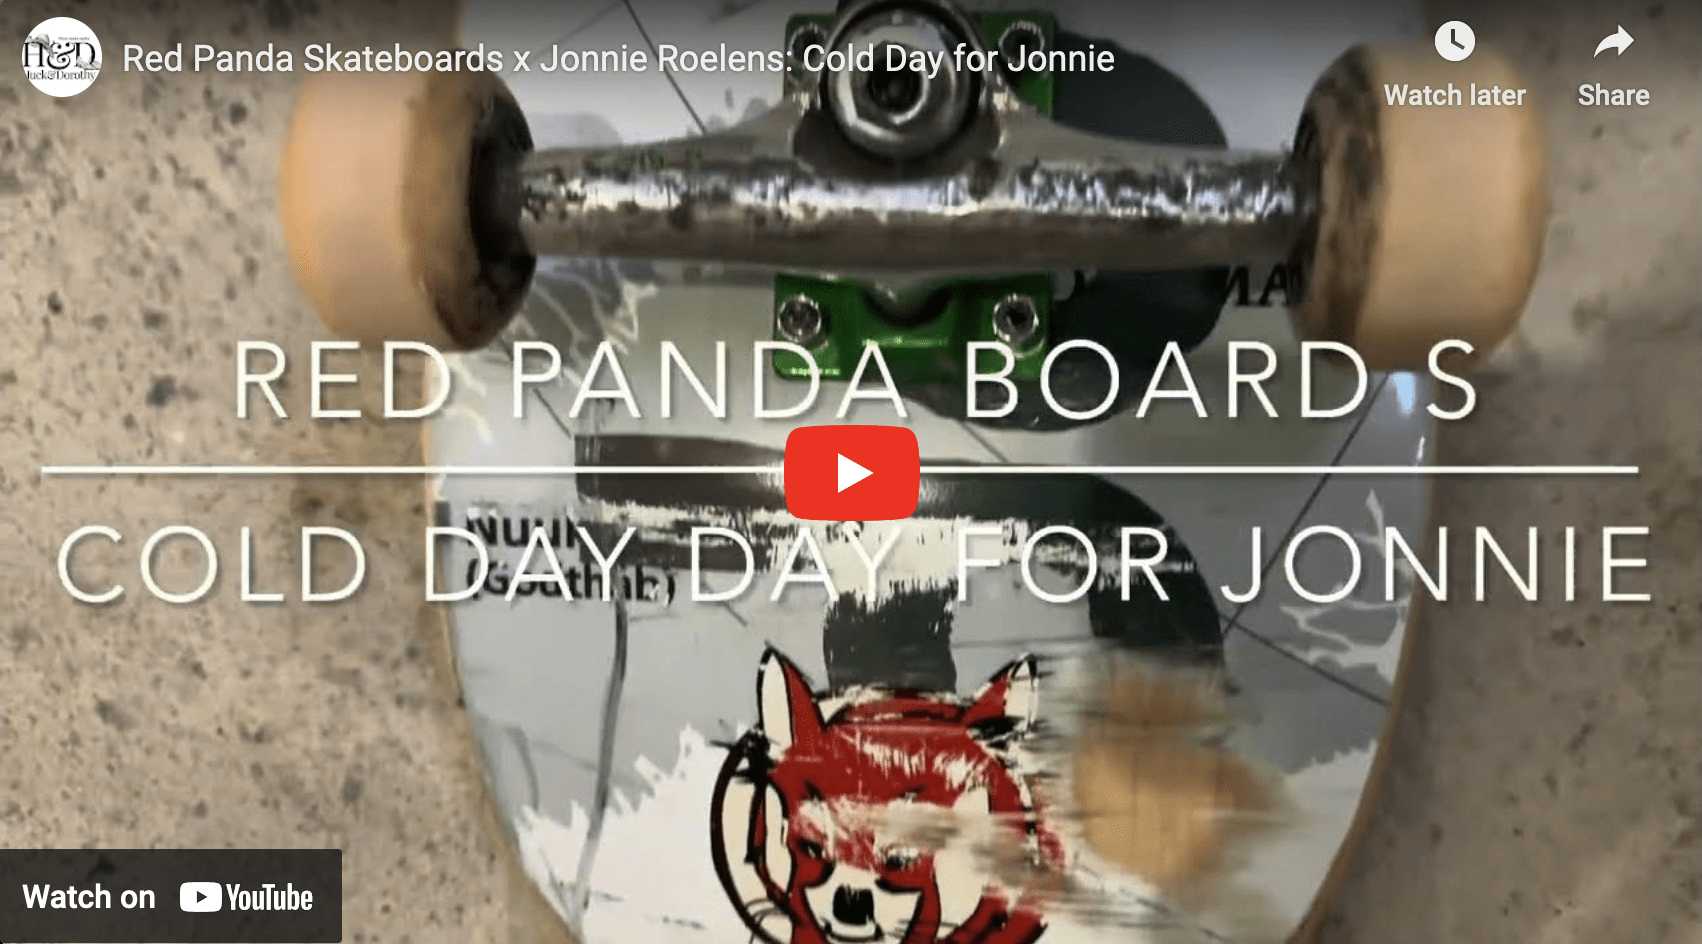 Cold Day for Jonnie x Red Panda Skateboards